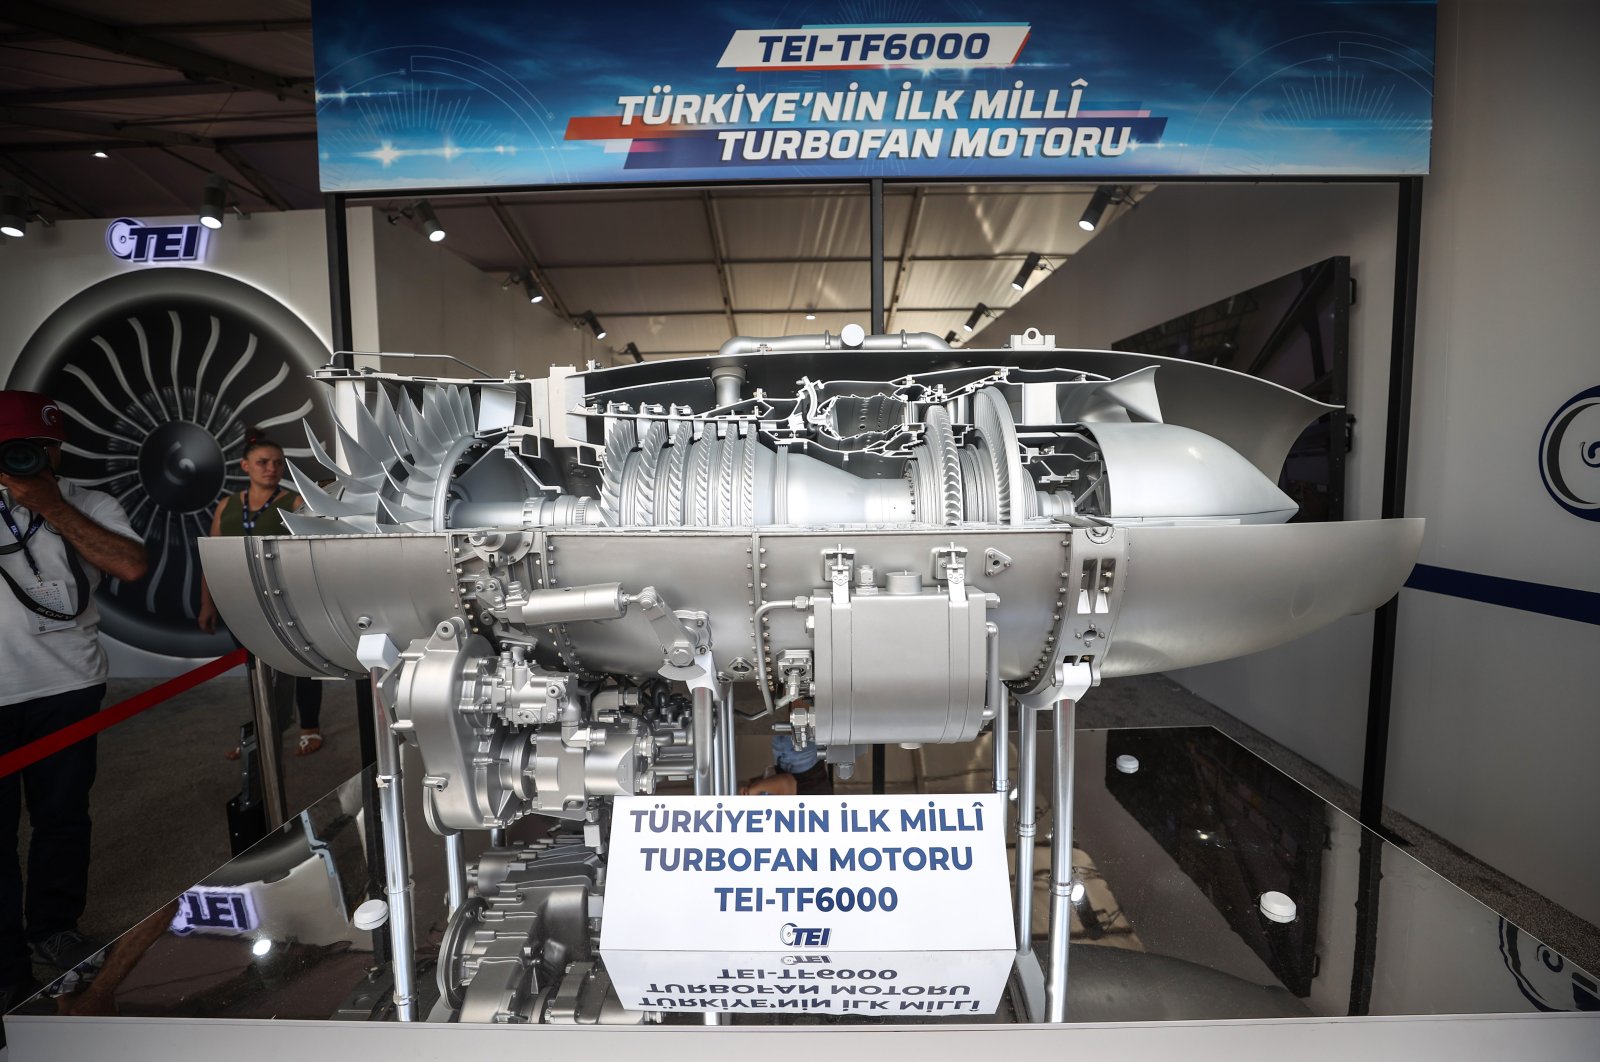 The TF-6000 turbofan engine – the first of its kind made in Türkiye – is on display during the Teknofest aerospace and technology festival in Samsun, Türkiye, Aug. 30, 2022. (AA Photo)